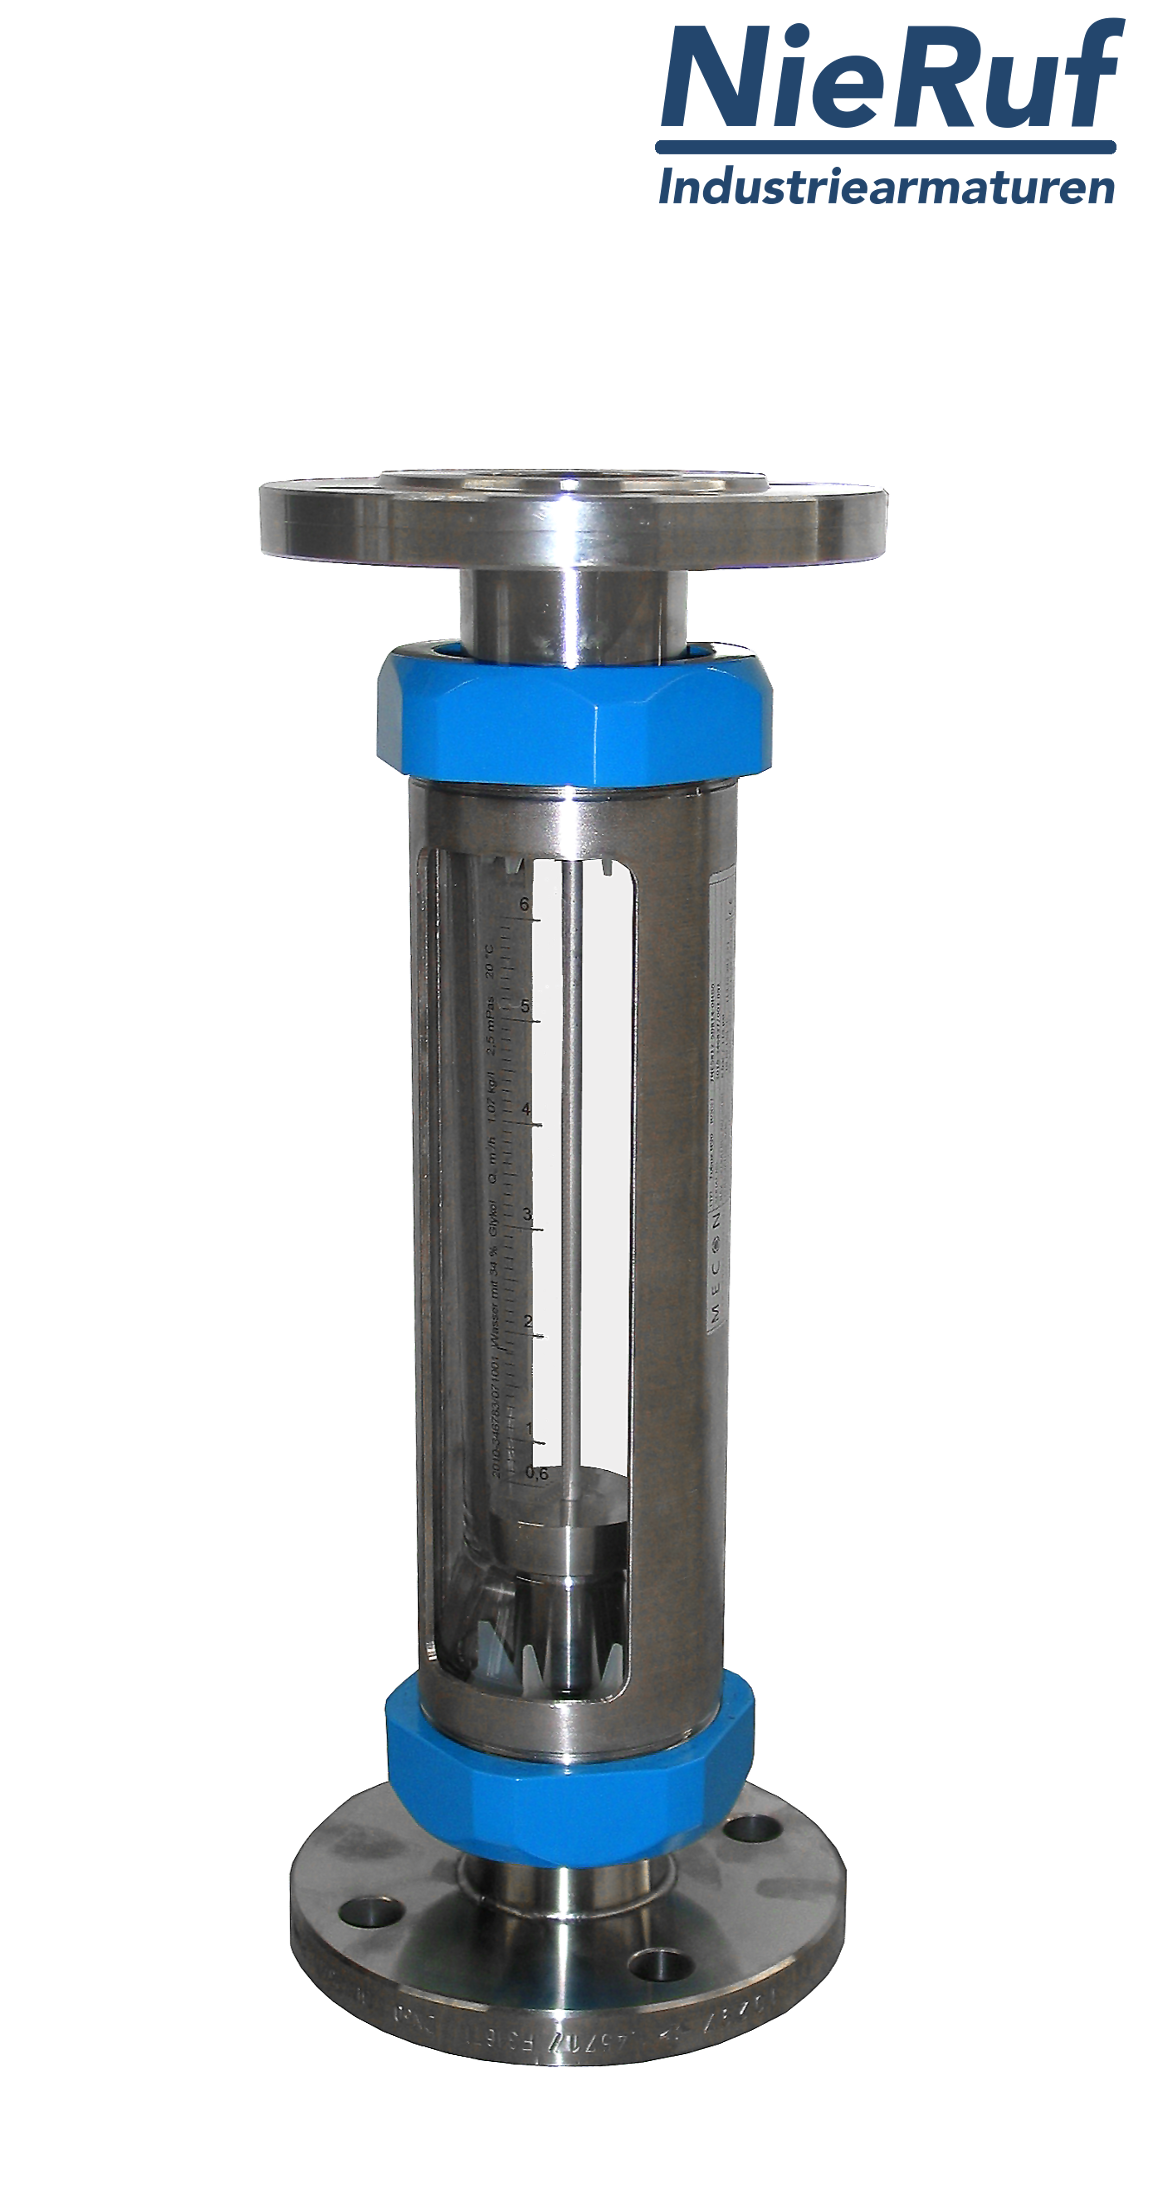 Variable area flowmeter stainless steel + borosilicate flange DN15 0.3 - 3.0 l/h water FKM